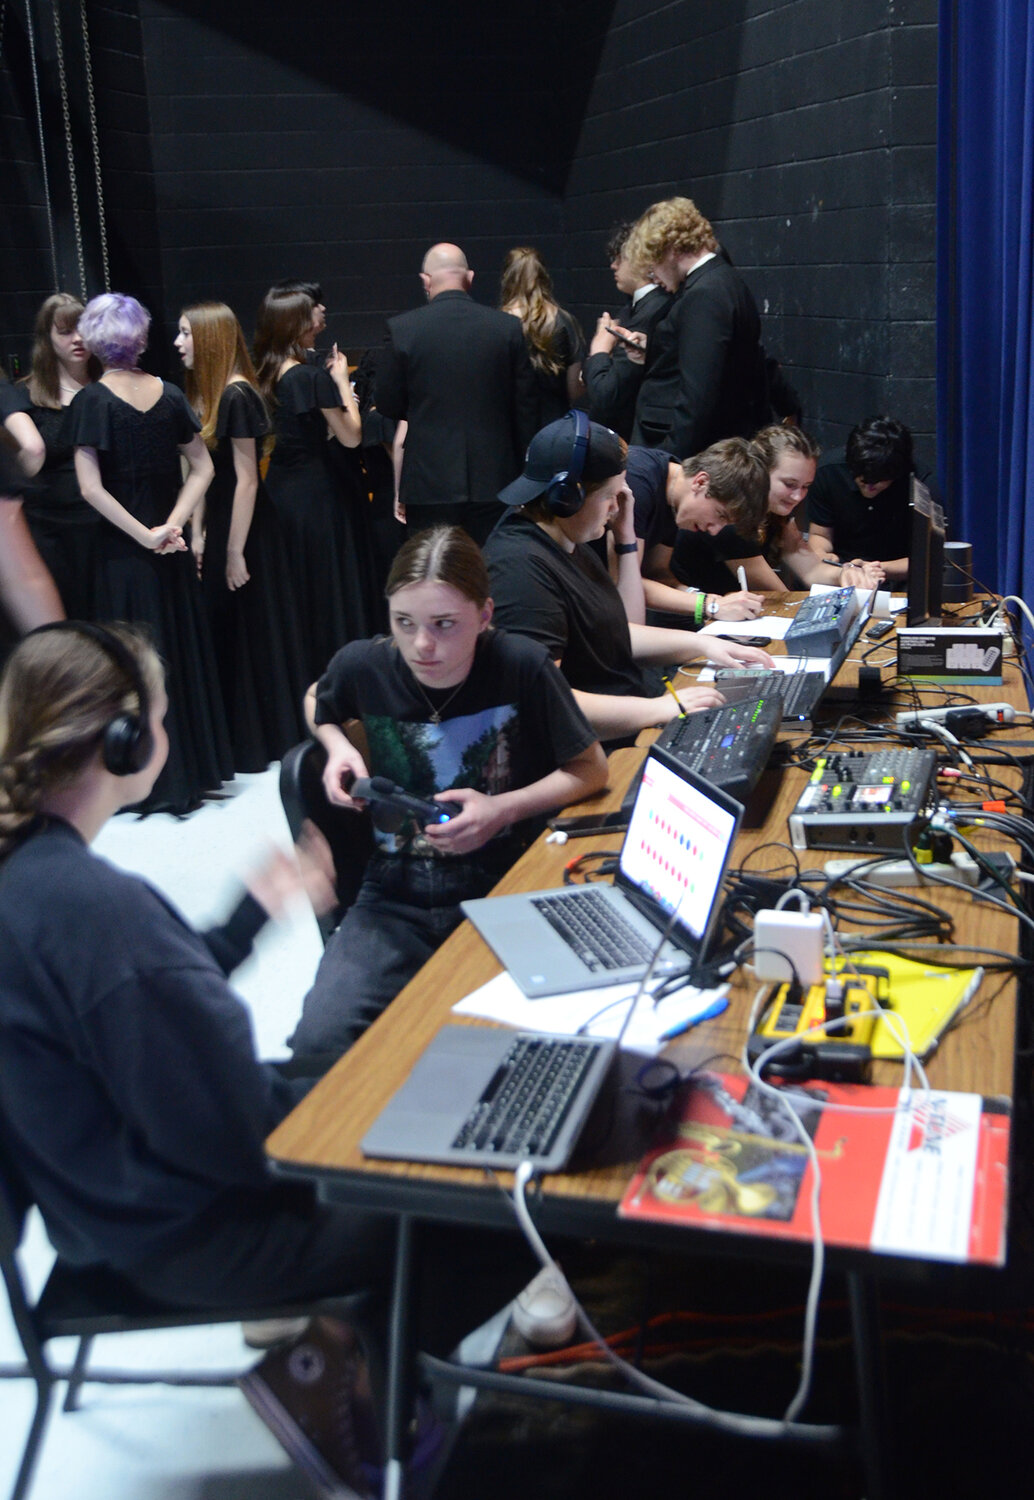 Student technicians backstage prepare for the Night at the Pops experience.